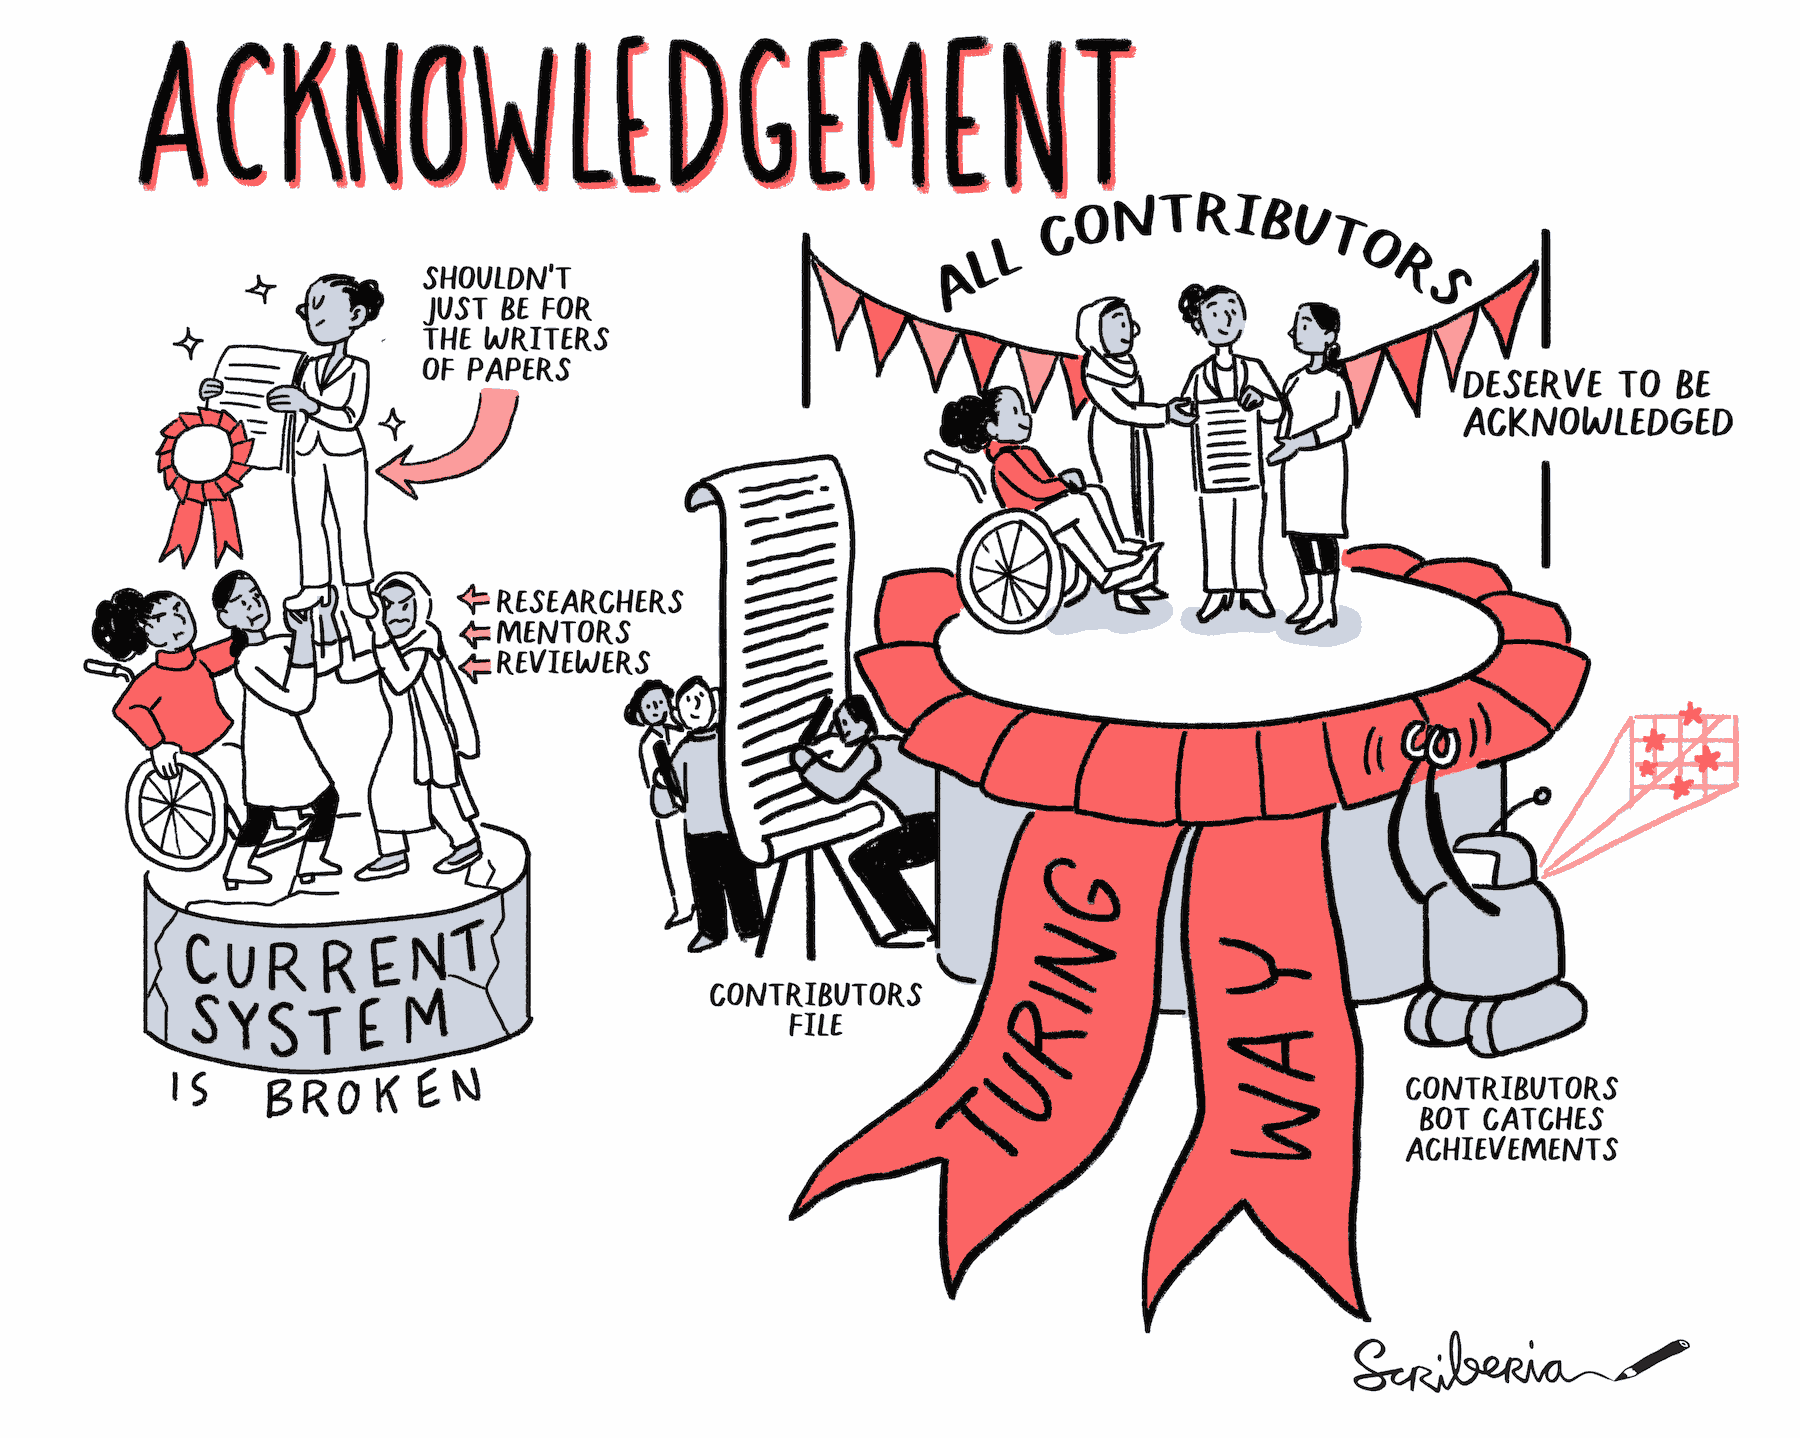 This illustration shows that the traditional acknowledgement system is broken then it shows how we try to acknowledge them fairly. We have a contributors bot that catches all the contributors information and stores them in contributors record